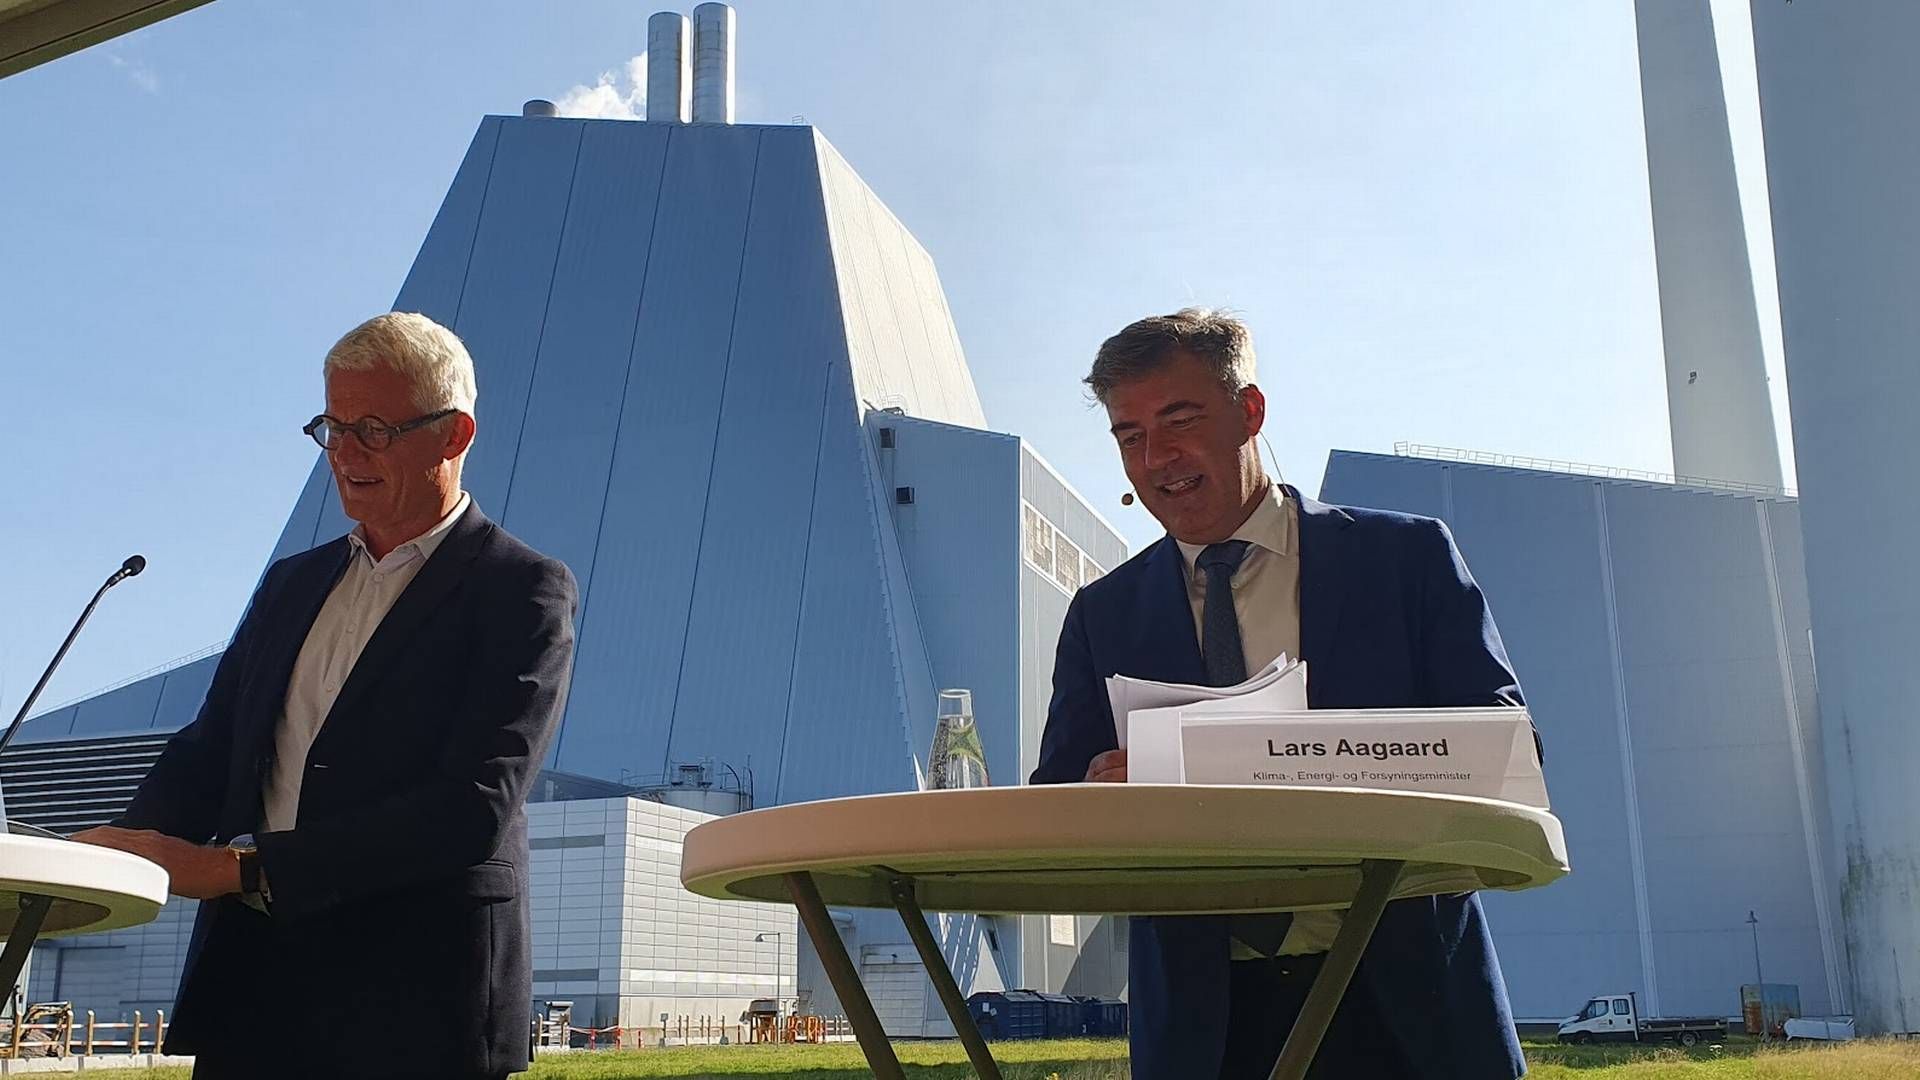 When all was well. Mads Nipper, Ørsted's CEO at the government's presentation of its CCS strategy together with the Danish minister for energy Lars Aagaard (right). | Photo: Jakob Skouboe